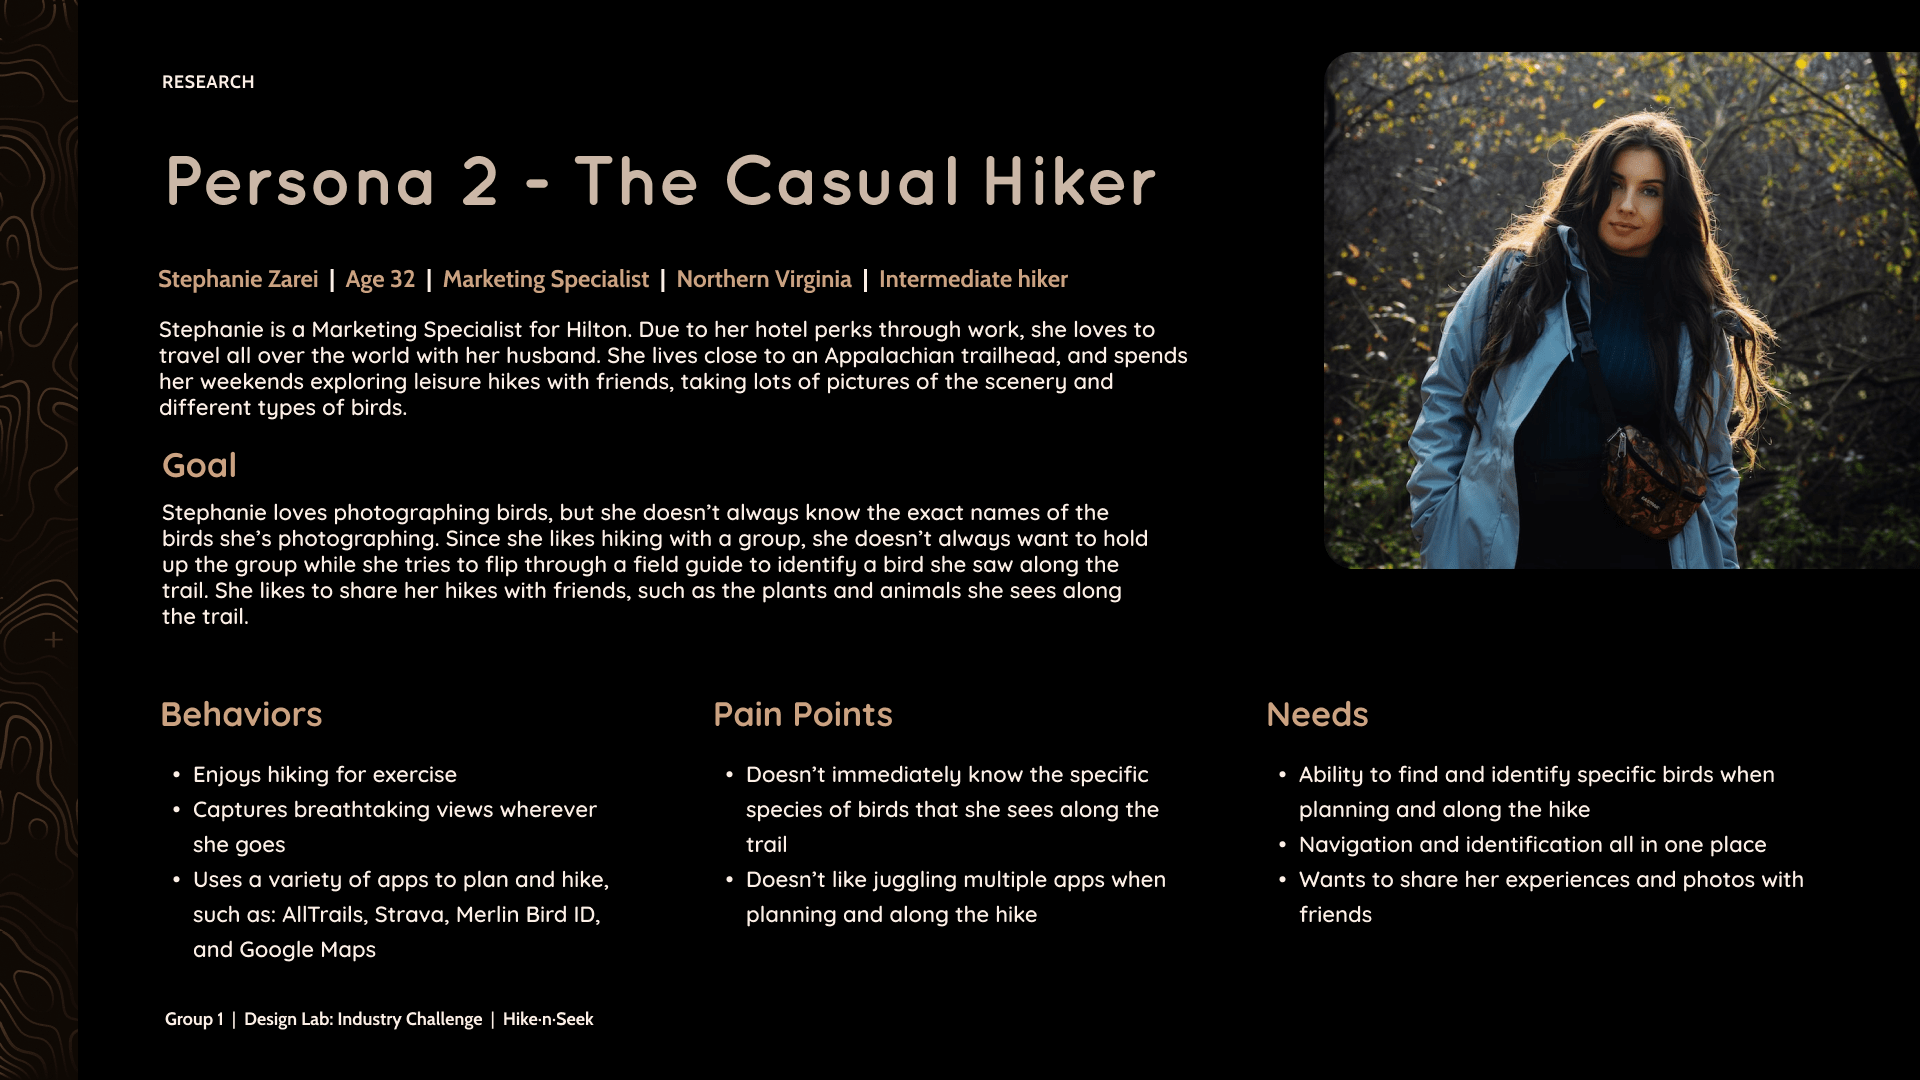 Persona 2 - The Casual Hiker